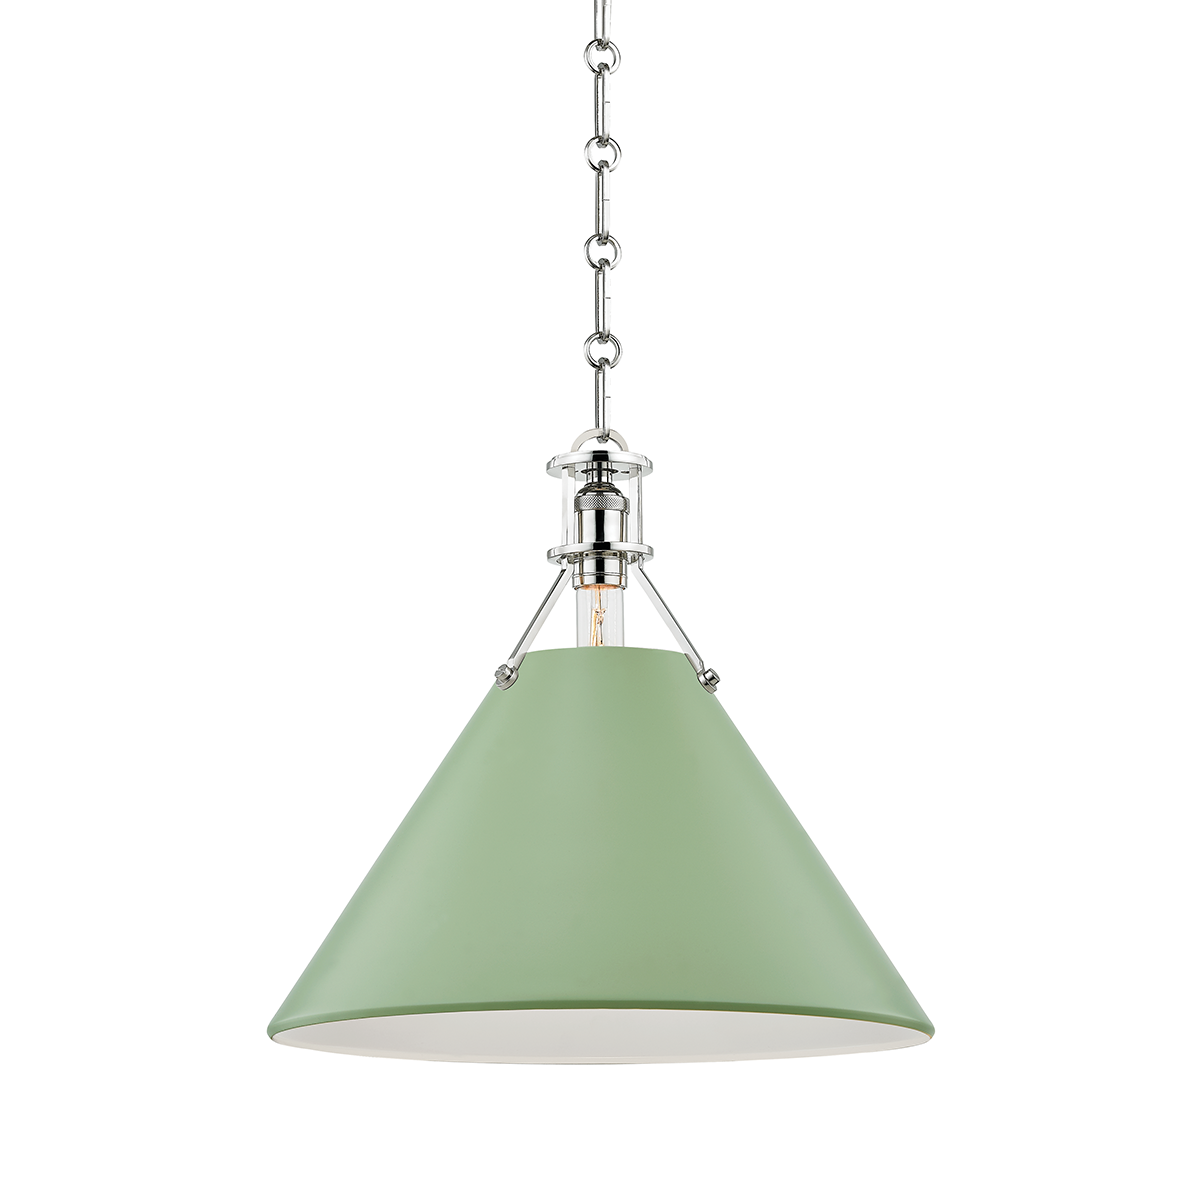 Steel Open Air Conical Shade Pendant